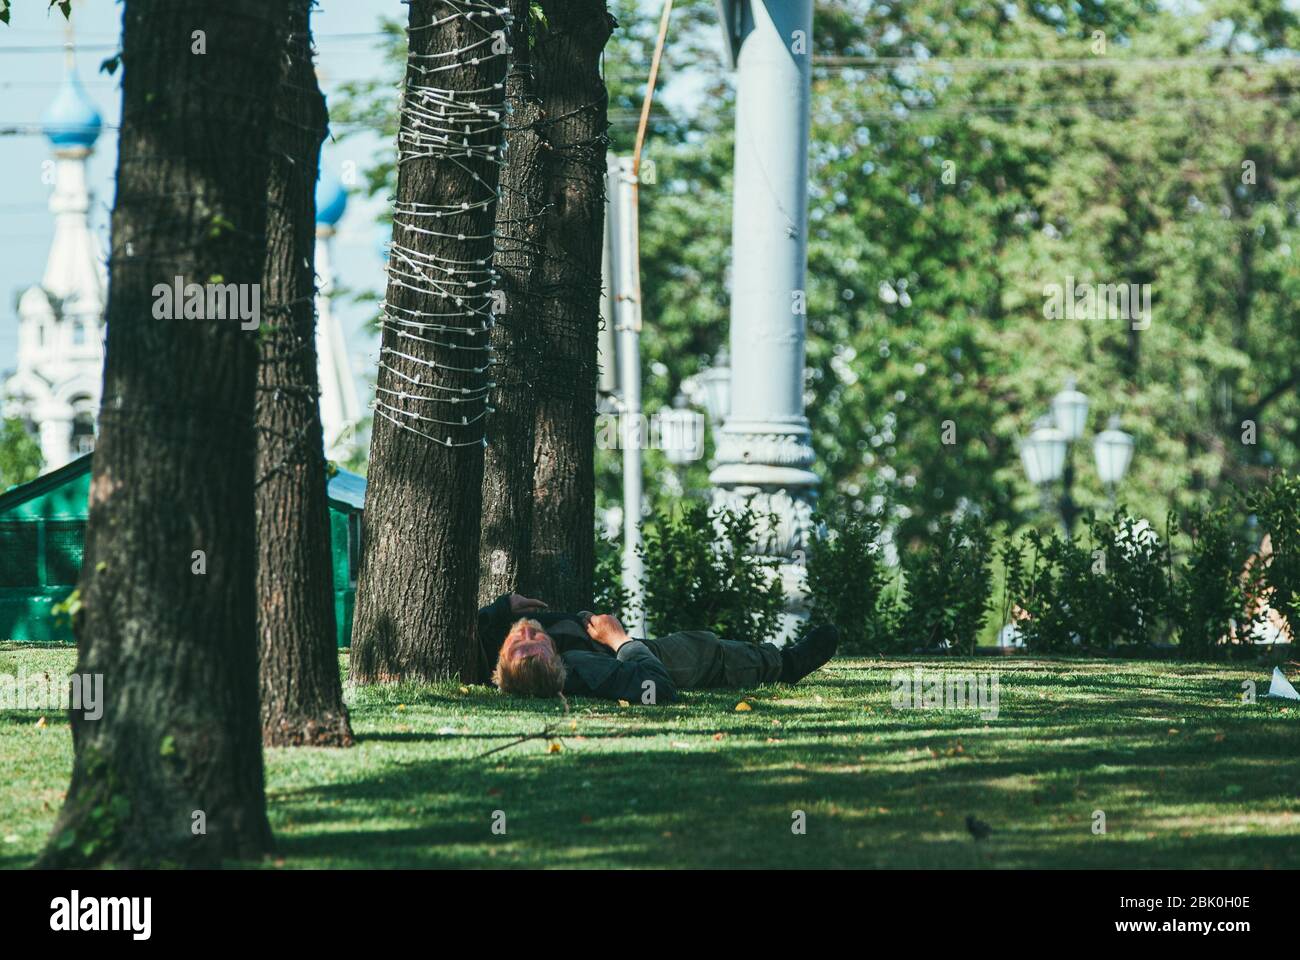 Moscow, Russia - may 31, 2014: A Homeless man sleeping on the grass lawn in the Moscow city Stock Photo